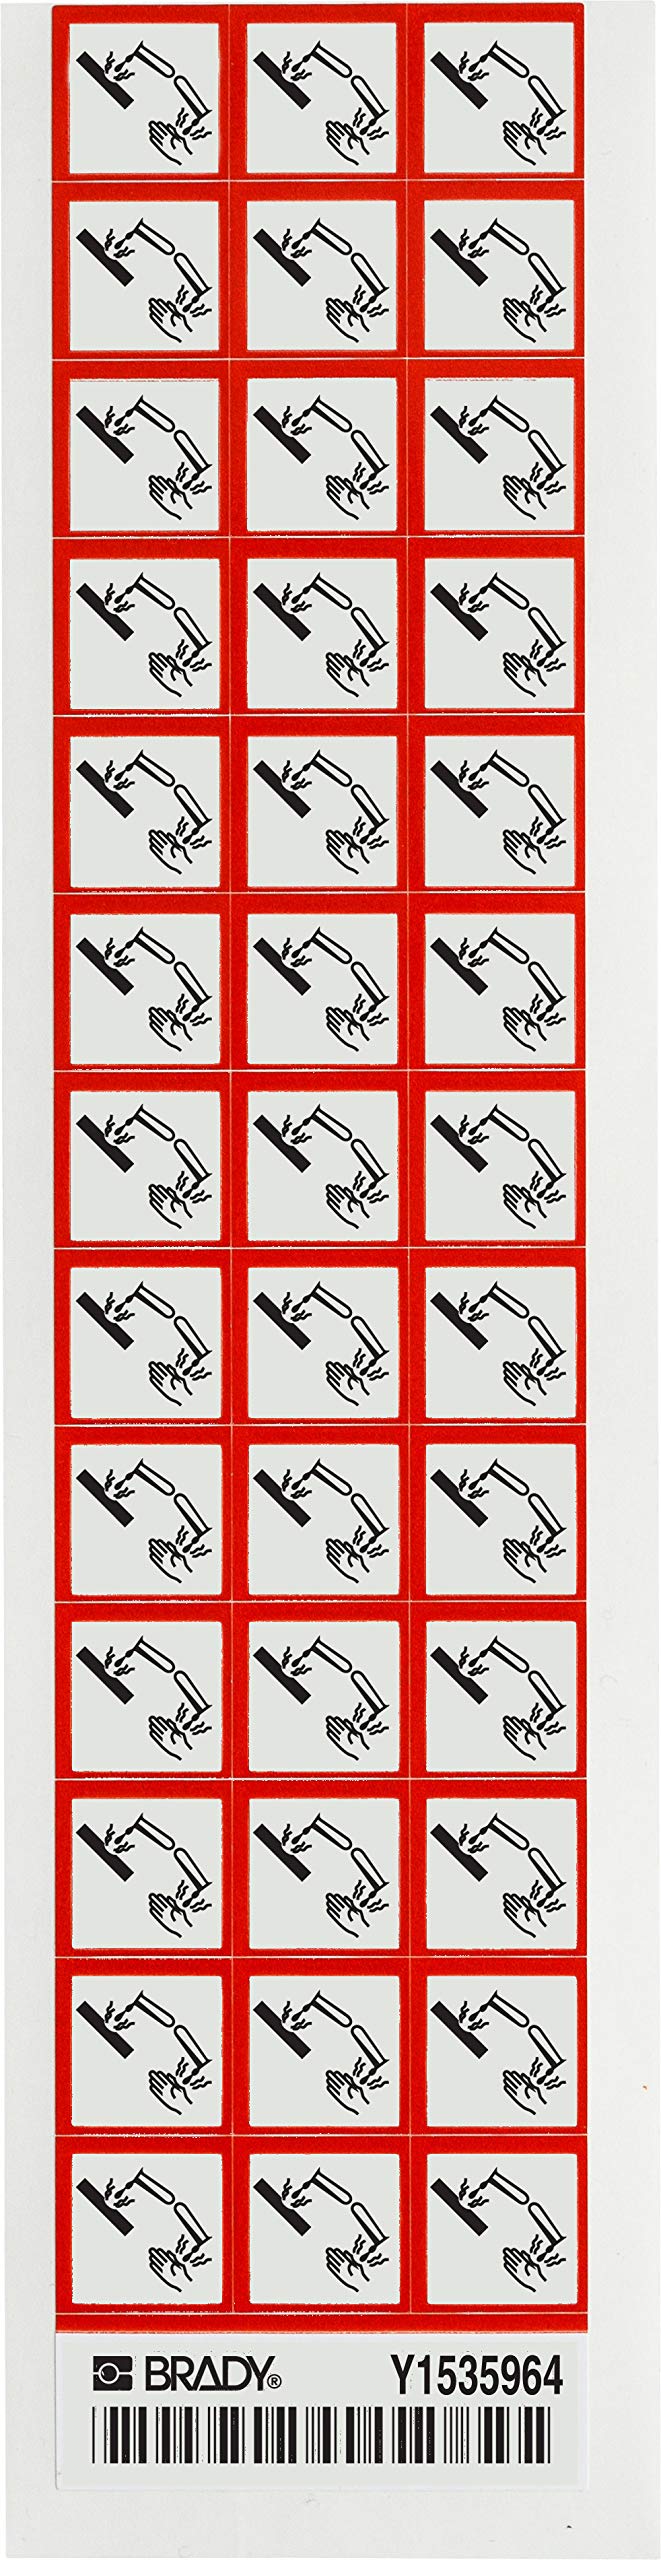 Brady 118893 Coated Paper GHS Corrosive Picto Labels , Black/Red On White, 5/8" Height x 5/8" Width, Pictogram "Corrosive" (39 Labels, 1 Card per Package)